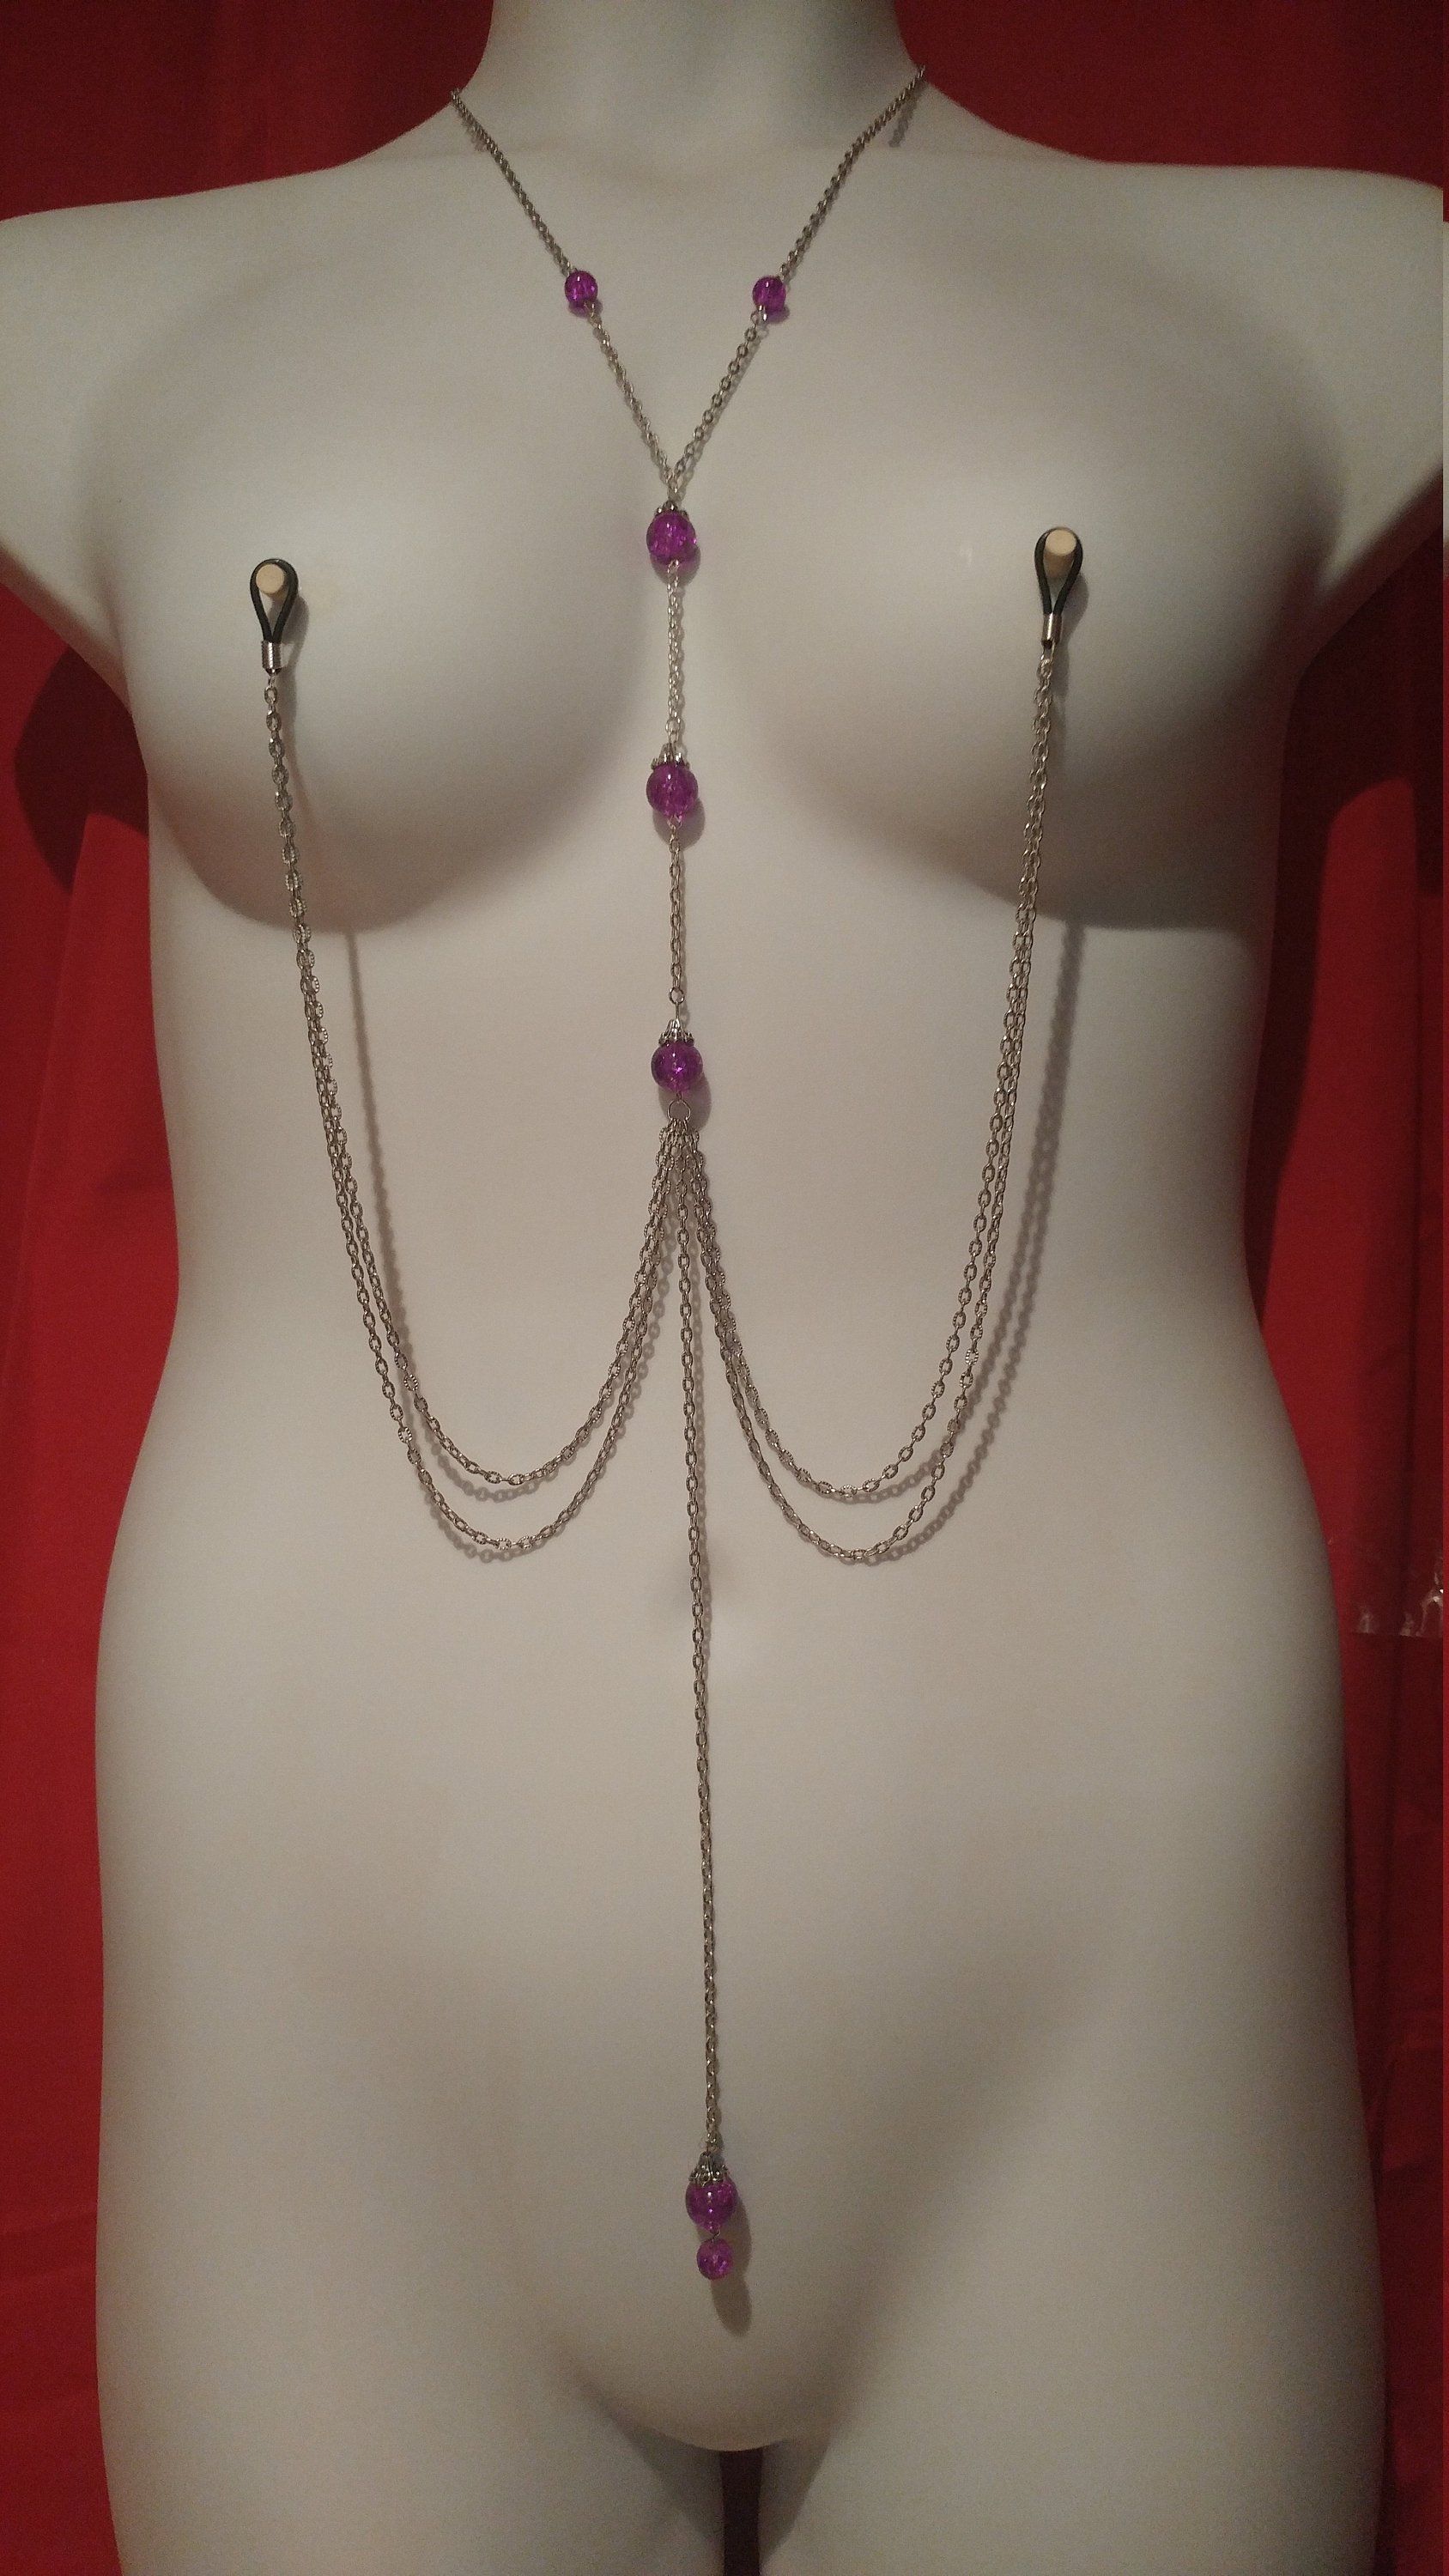 Non piercing nipple and clit jewelry